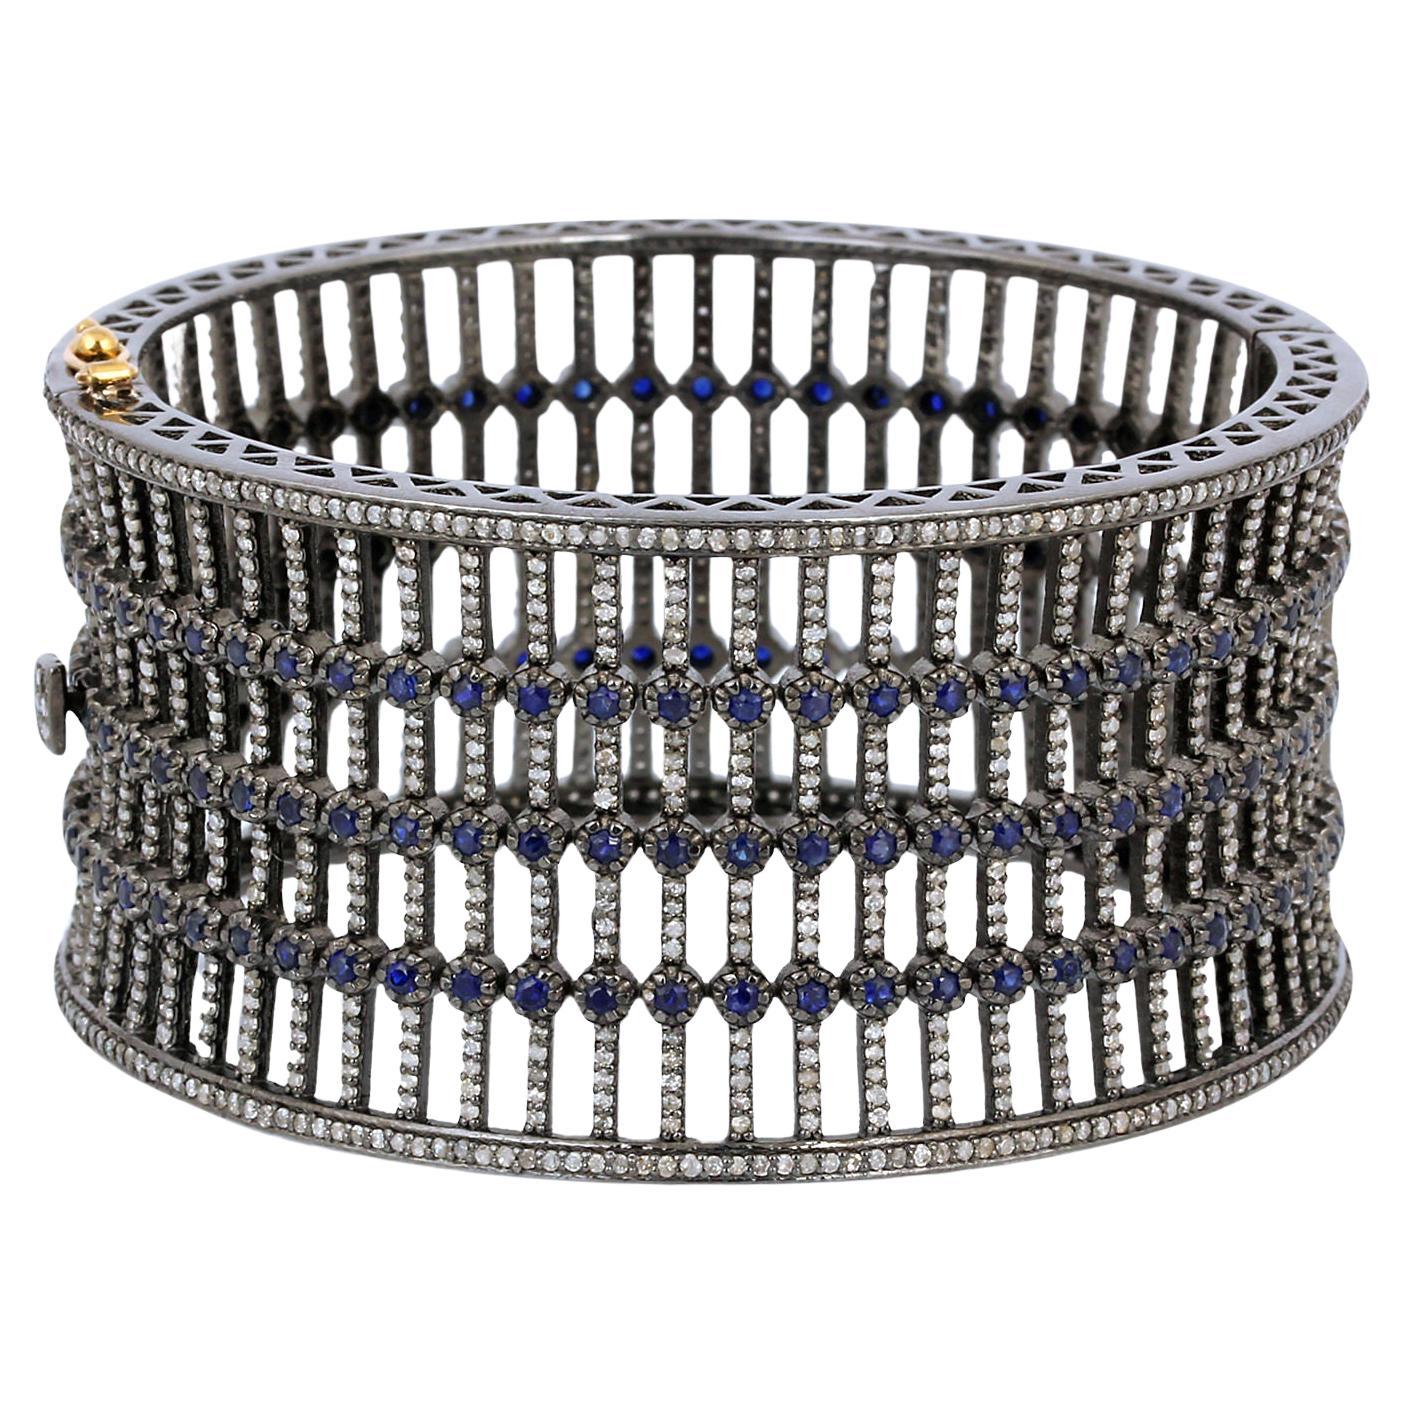 Jail Bar Style Cuff With Diamonds & Sapphire Made In 14k Gold For Sale